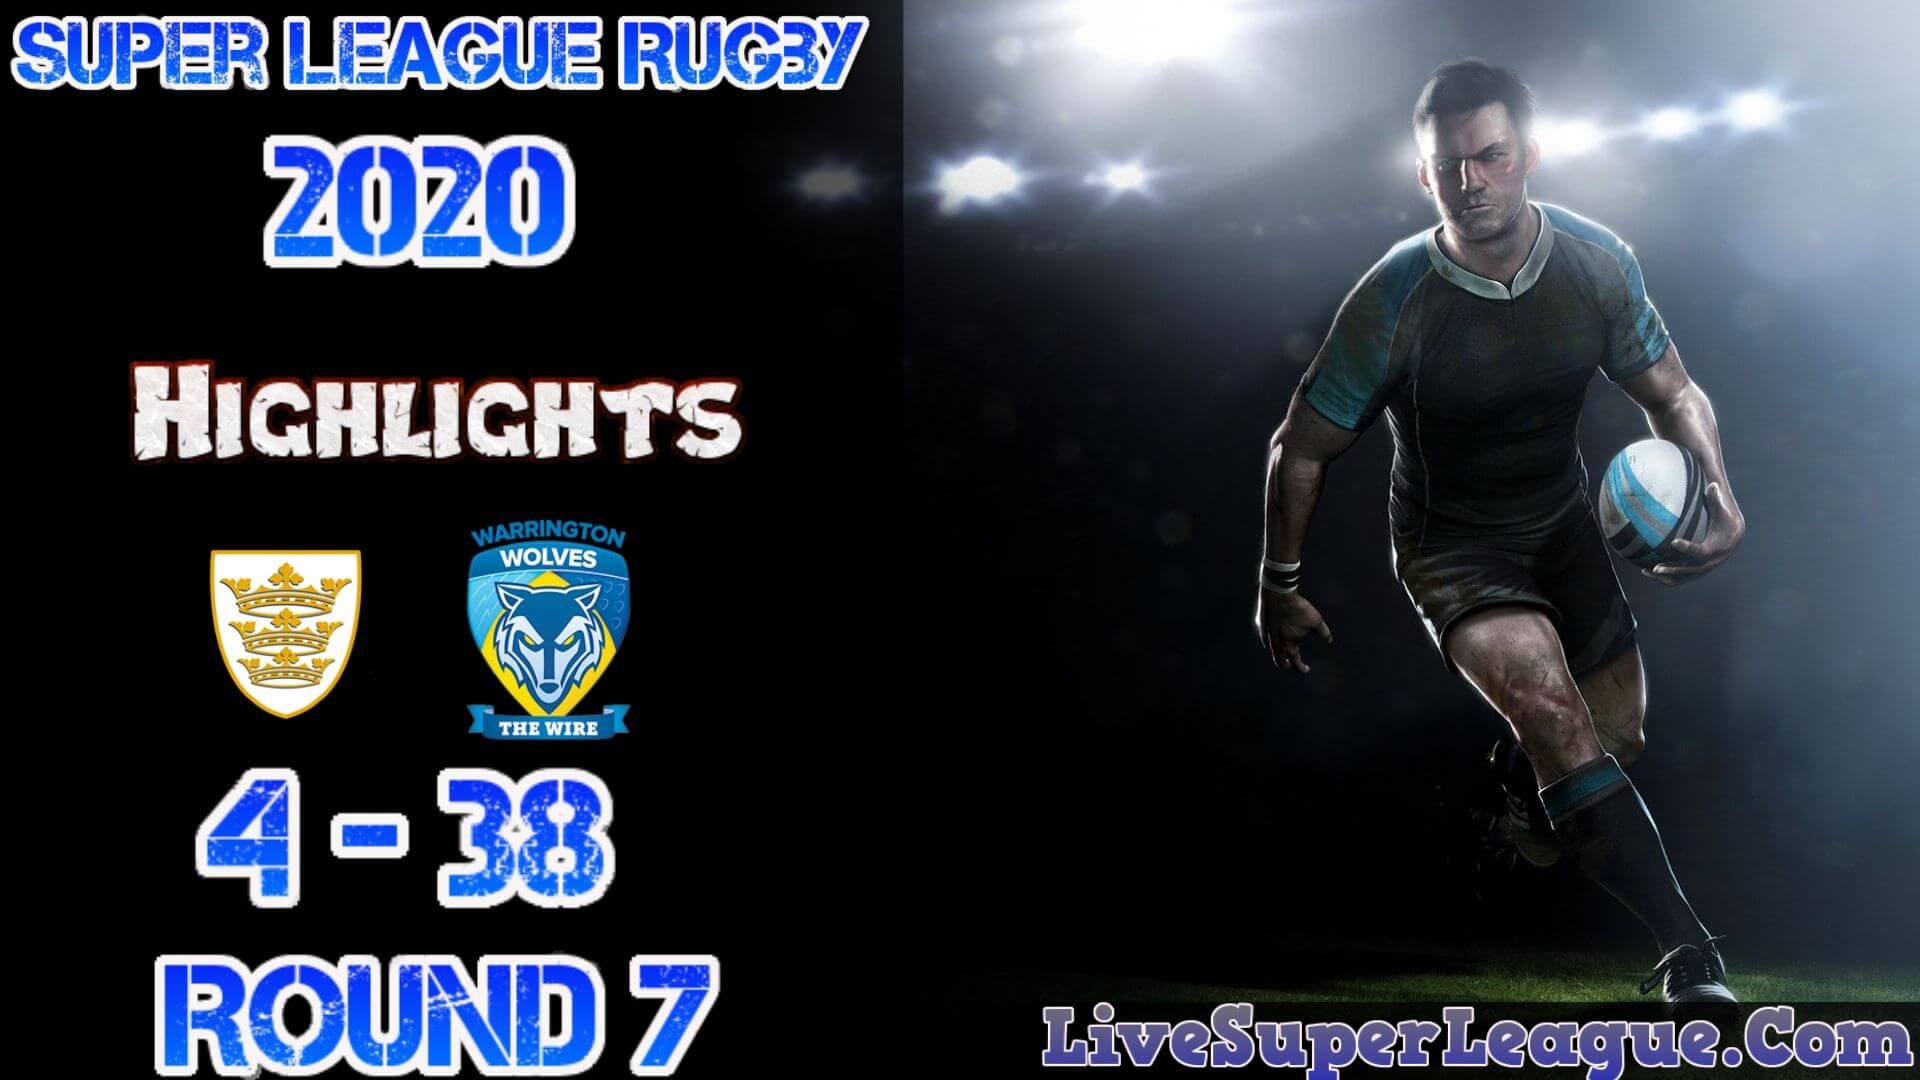 Hull FC Vs Warrington Super League Rugby Result 2020 Rd7